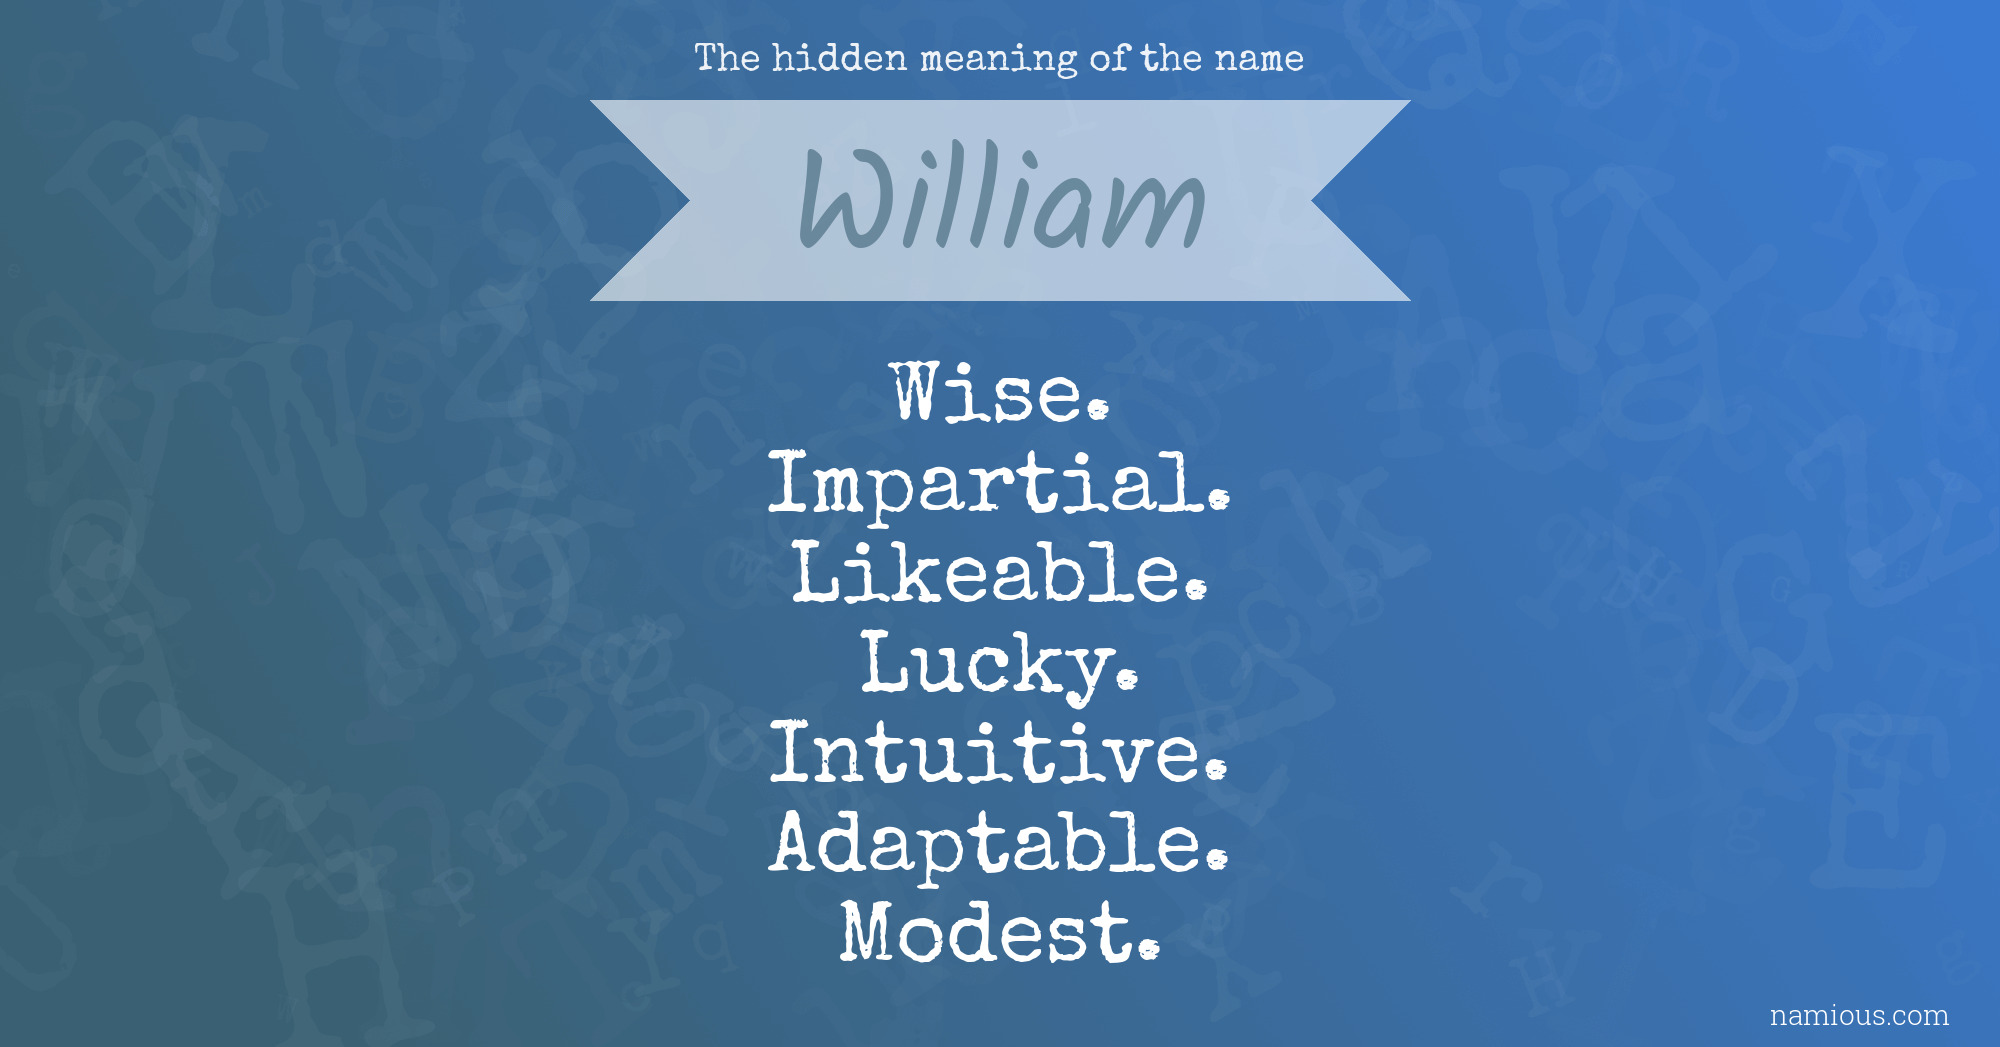 The hidden meaning of the name William | Namious